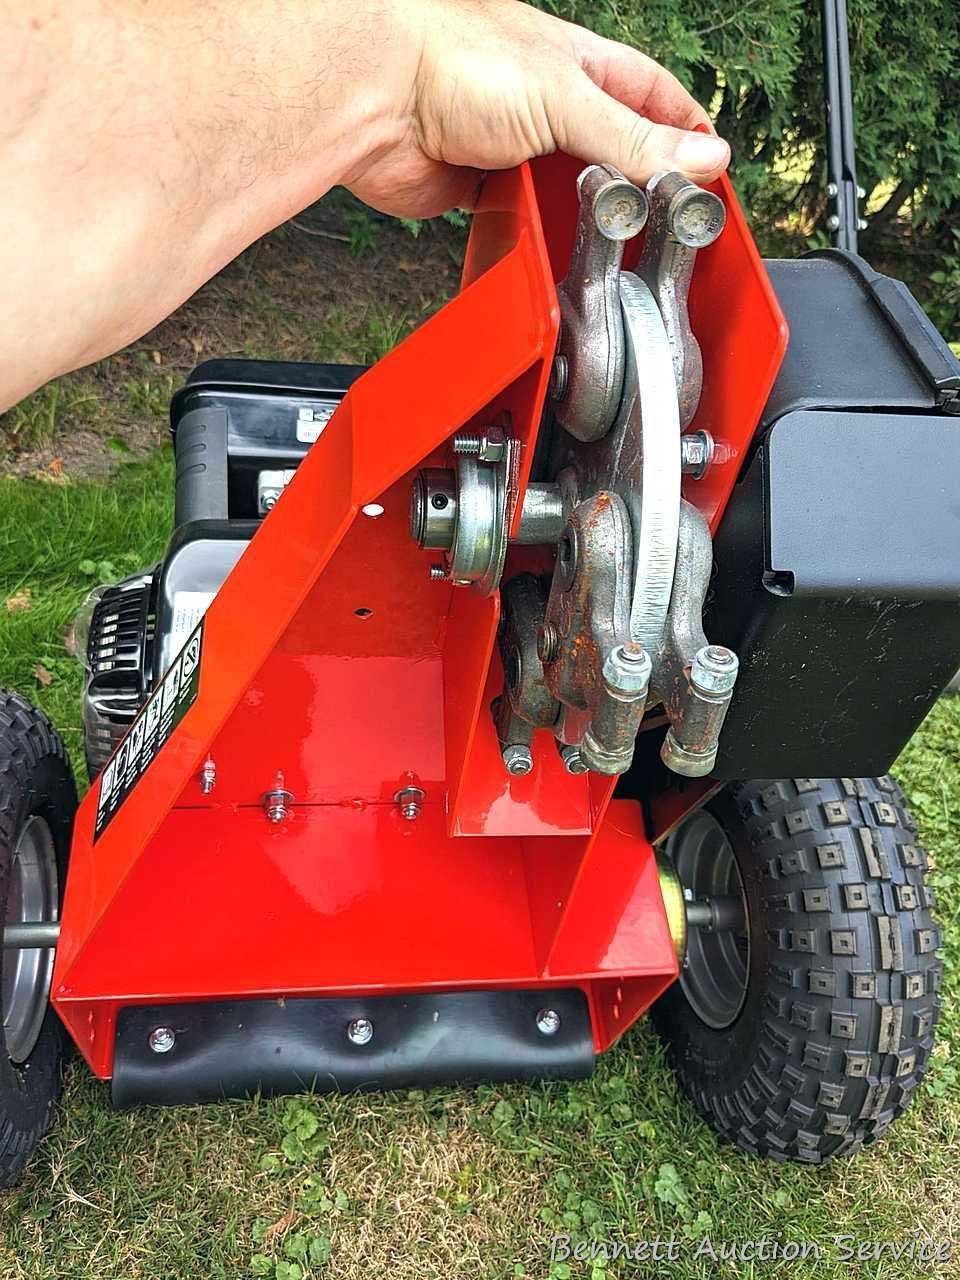 DR Stump Grinder Pro XL comes with manual, battery, oil, wrenches, etc. Appears as-new, as it's not